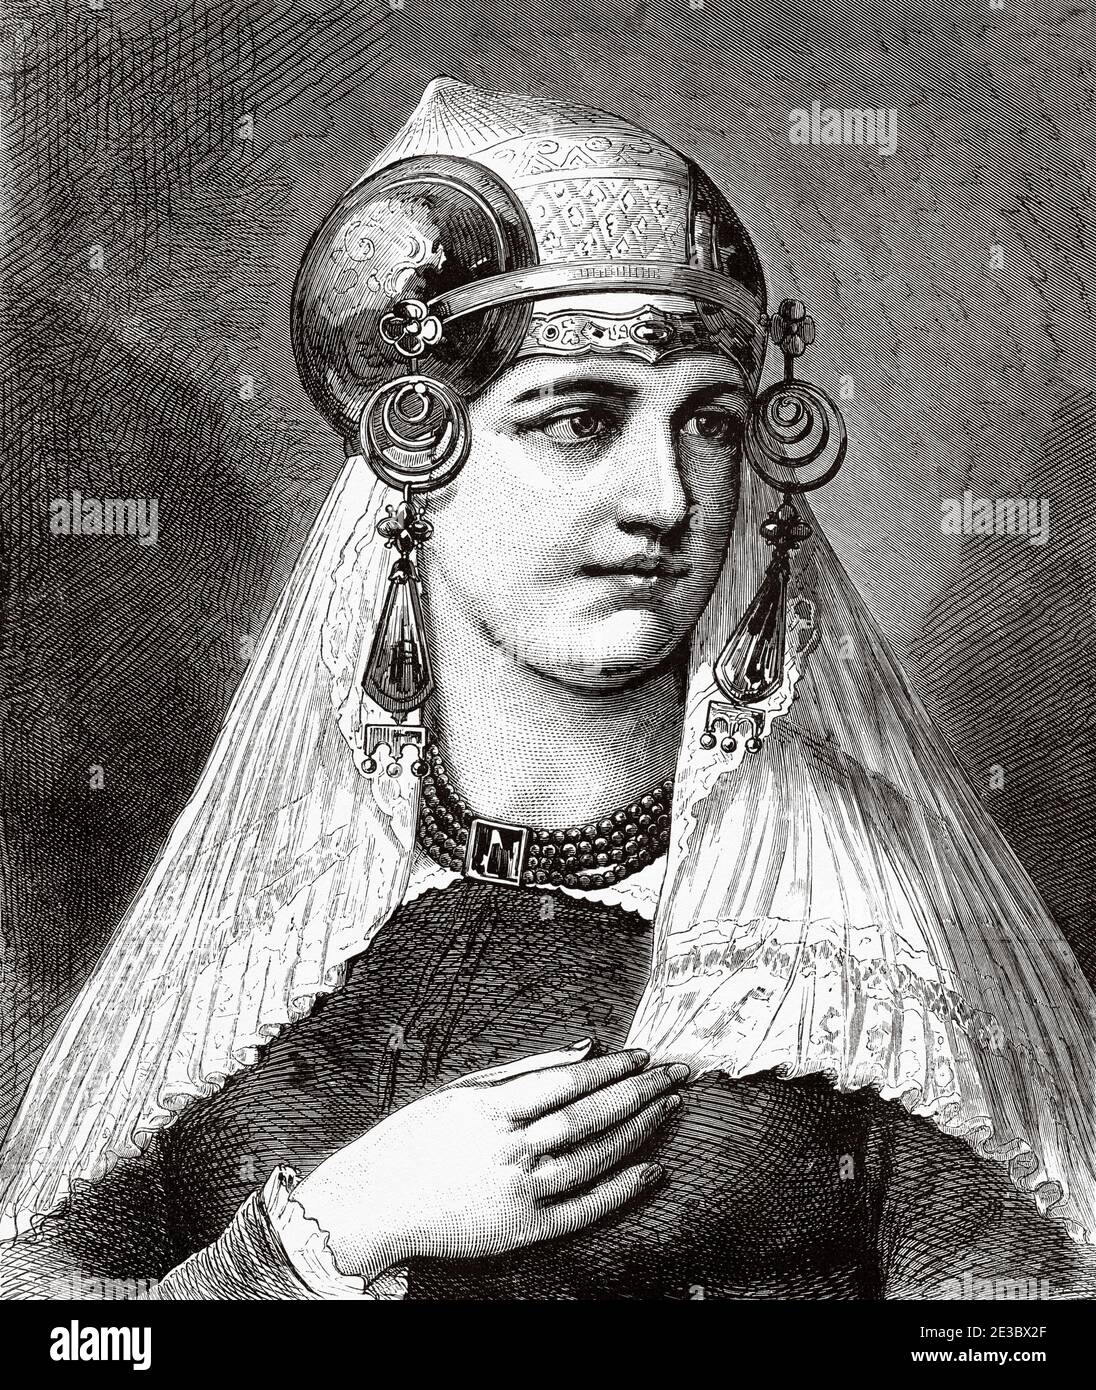 19th century woman dressed in the traditional clothing and ornaments of the dutch city of Vlaardingen The Netherlands. Old 19th century engraved illustration, El Mundo Ilustrado 1880 Stock Photo